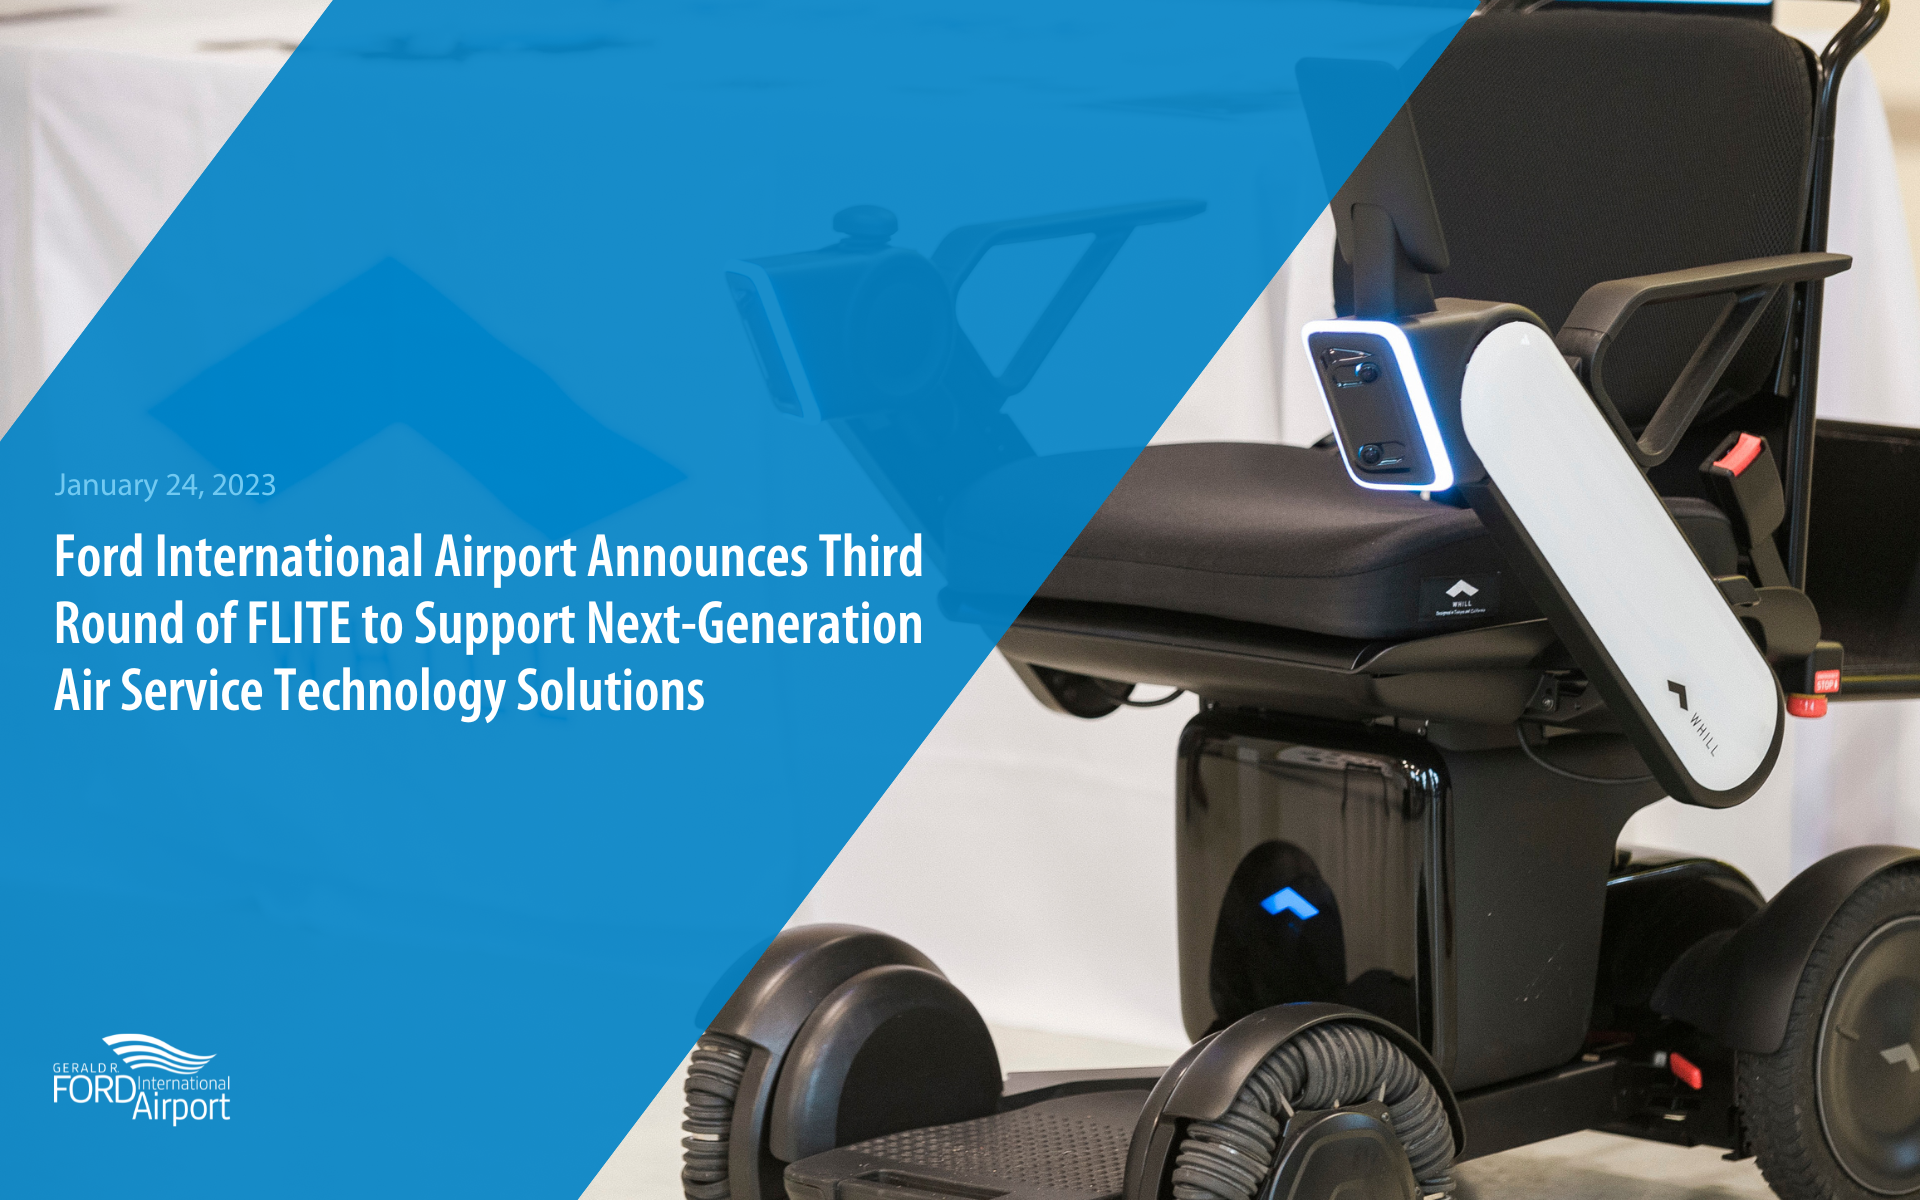 Ford International Airport Announces Third Round of FLITE to Support Next-Generation Air Service Technology Solutions